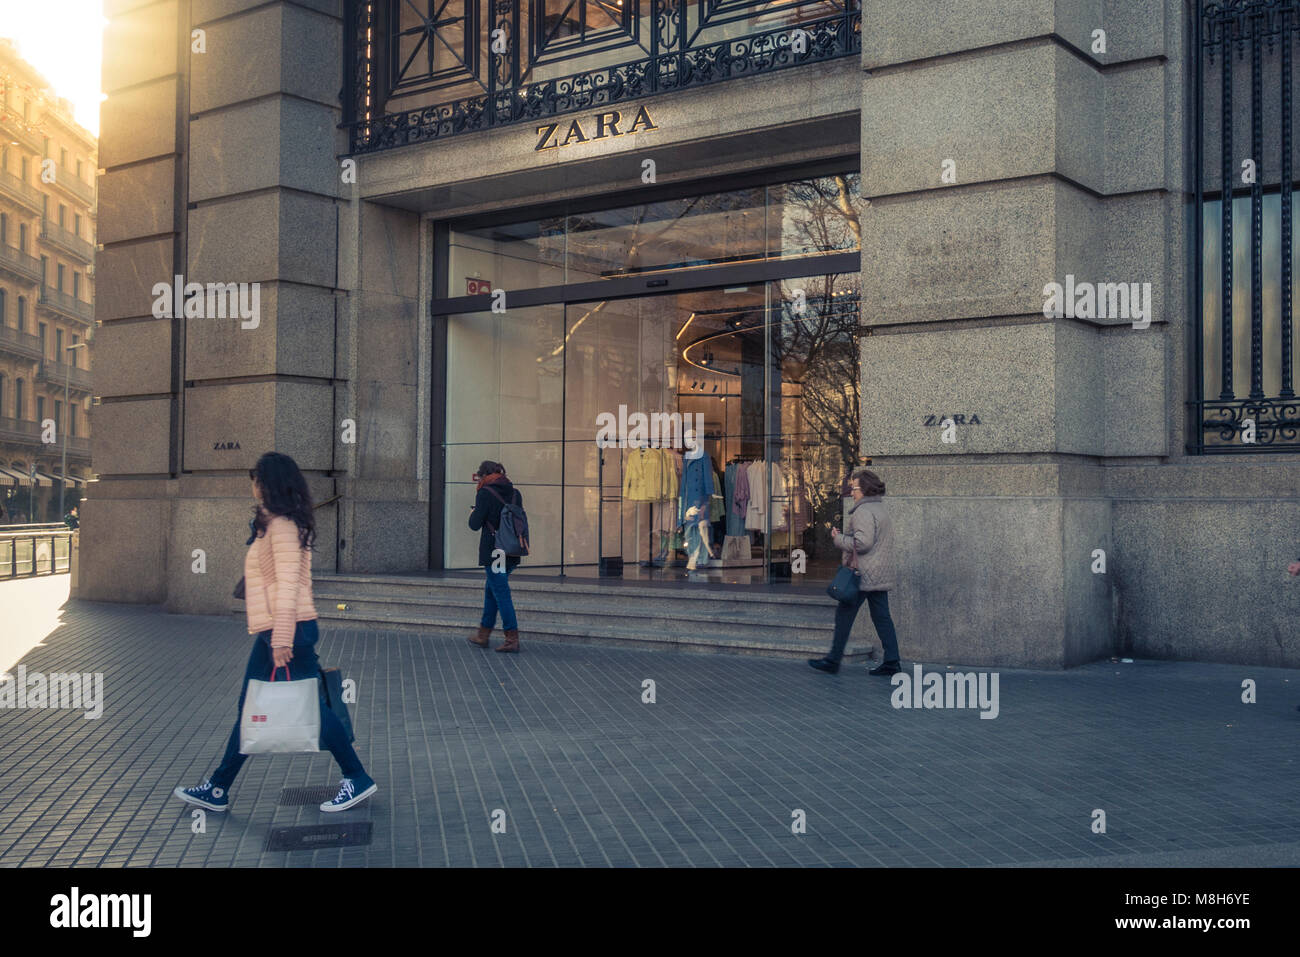 Barcelona, Spain. February 2018: People walking in front of Zara shop  windows in Barcelona's downtown, Plaza Catalunya, considered the city  center. Co Stock Photo - Alamy